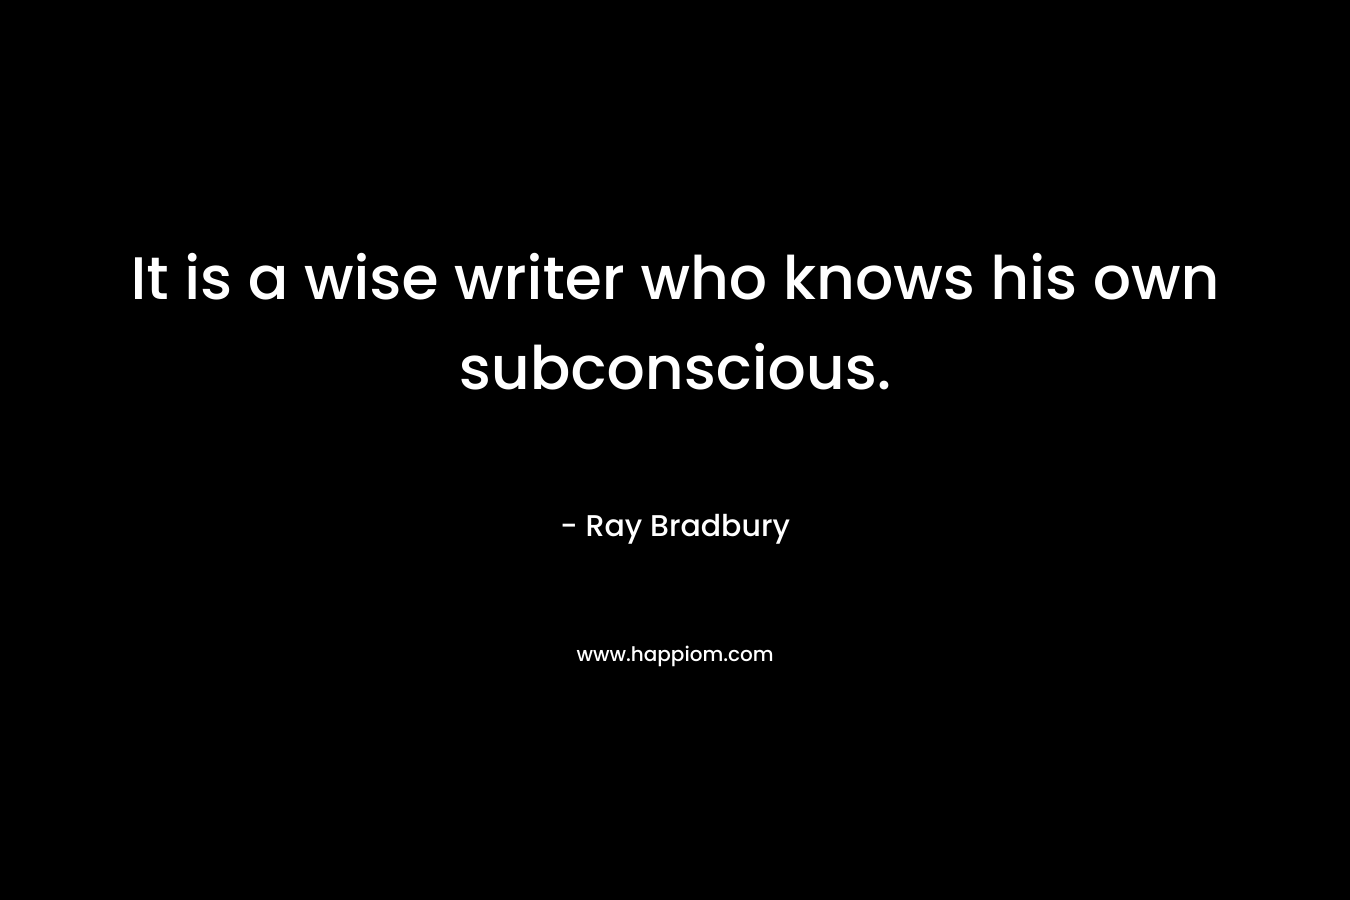 It is a wise writer who knows his own subconscious. – Ray Bradbury